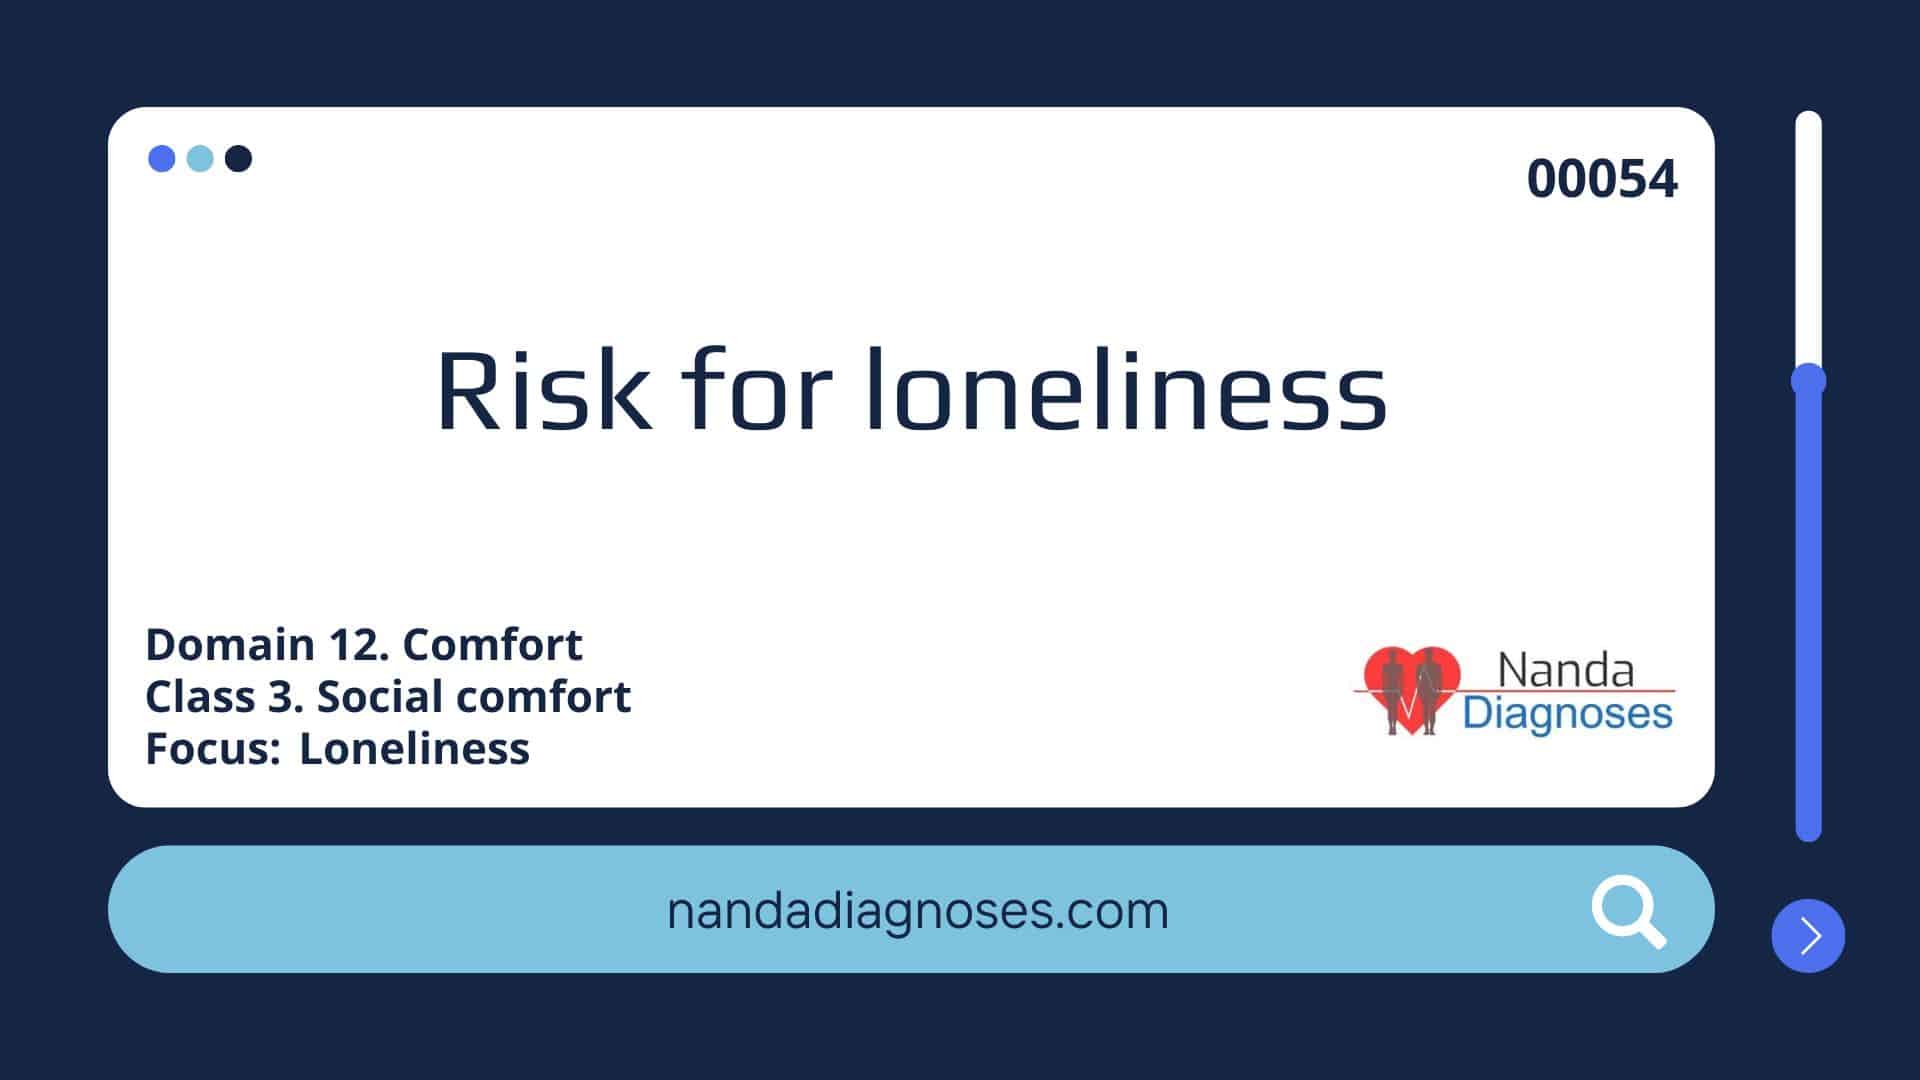 Nursing diagnosis Risk for loneliness